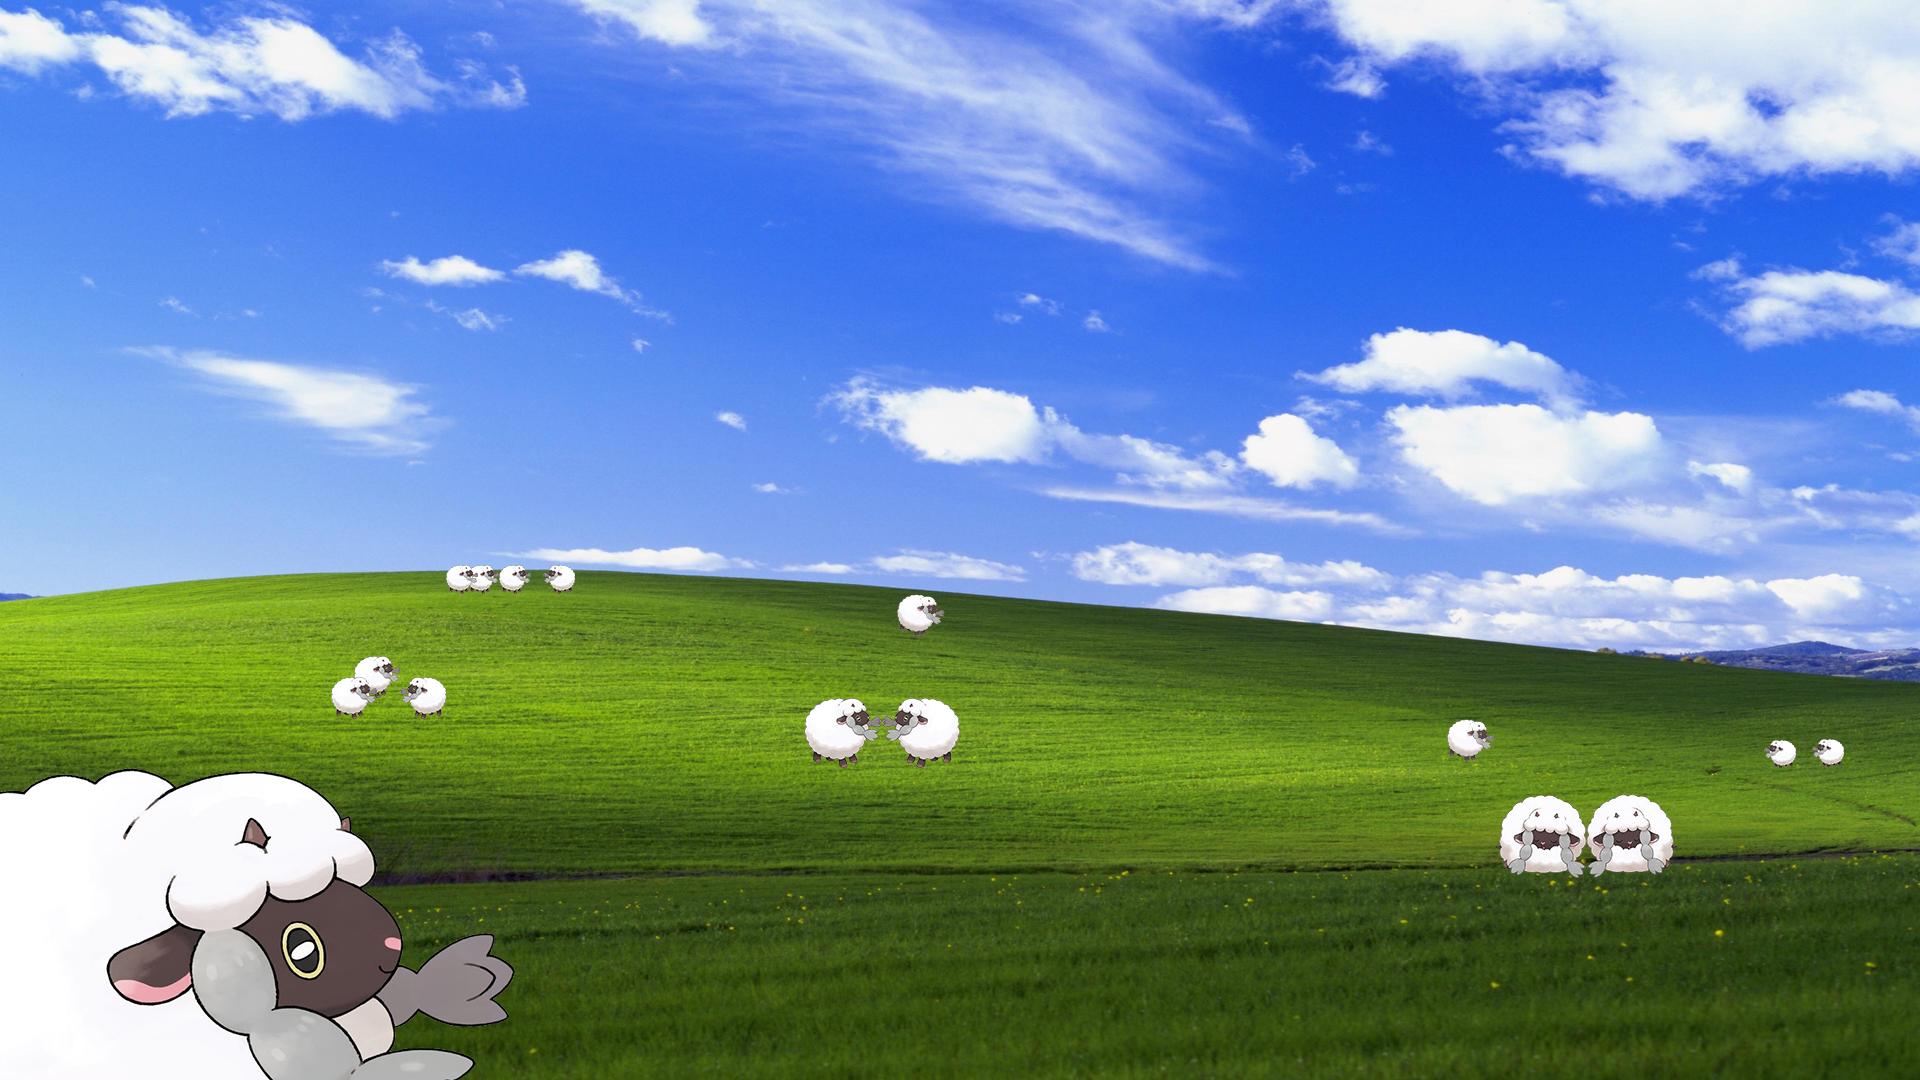 If anyone is interested I made a wooloo Desktop wallpaper